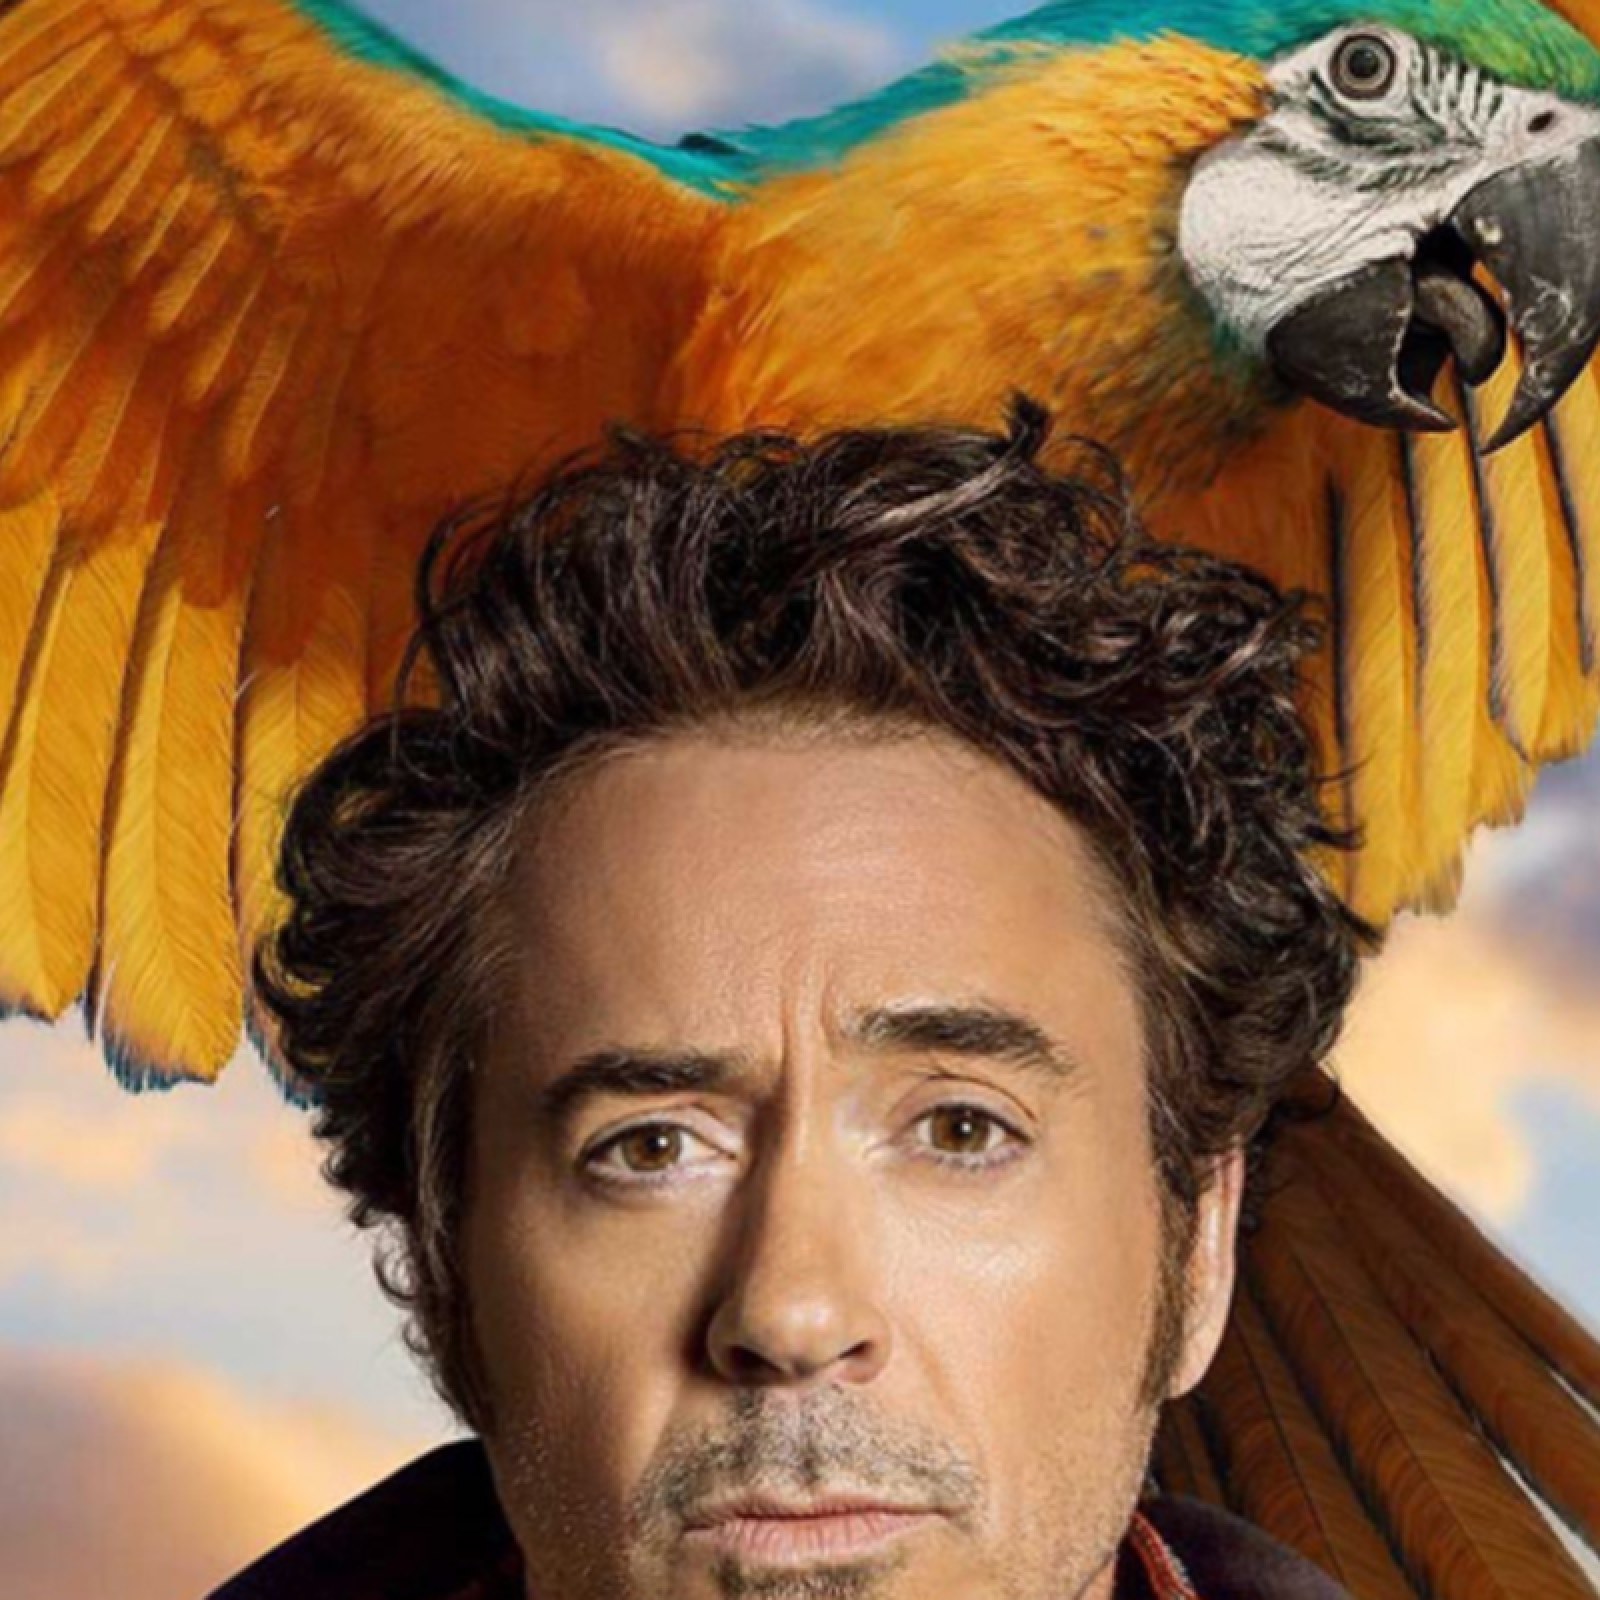 Dolittle' Cast: Who Voices the Animals in the New Robert Downey Jr. Movie?